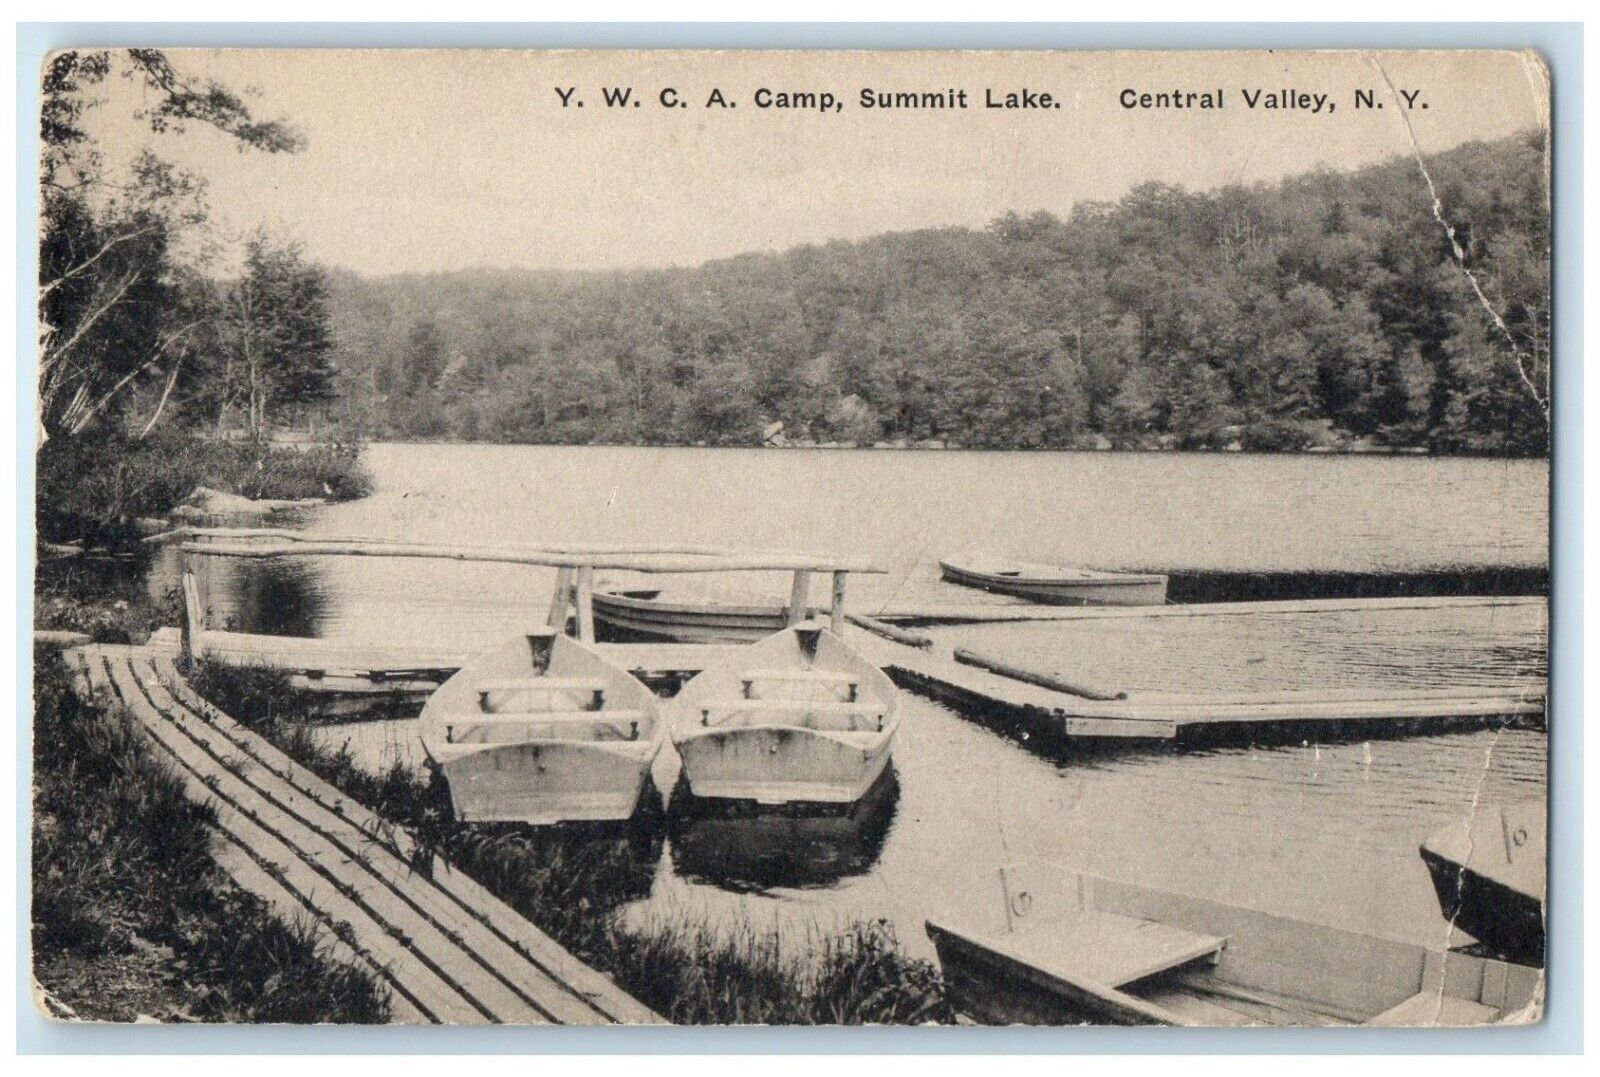 c1940 YWCA Camp Summit Lake Boat Canoe Central Valley New York Vintage Postcard